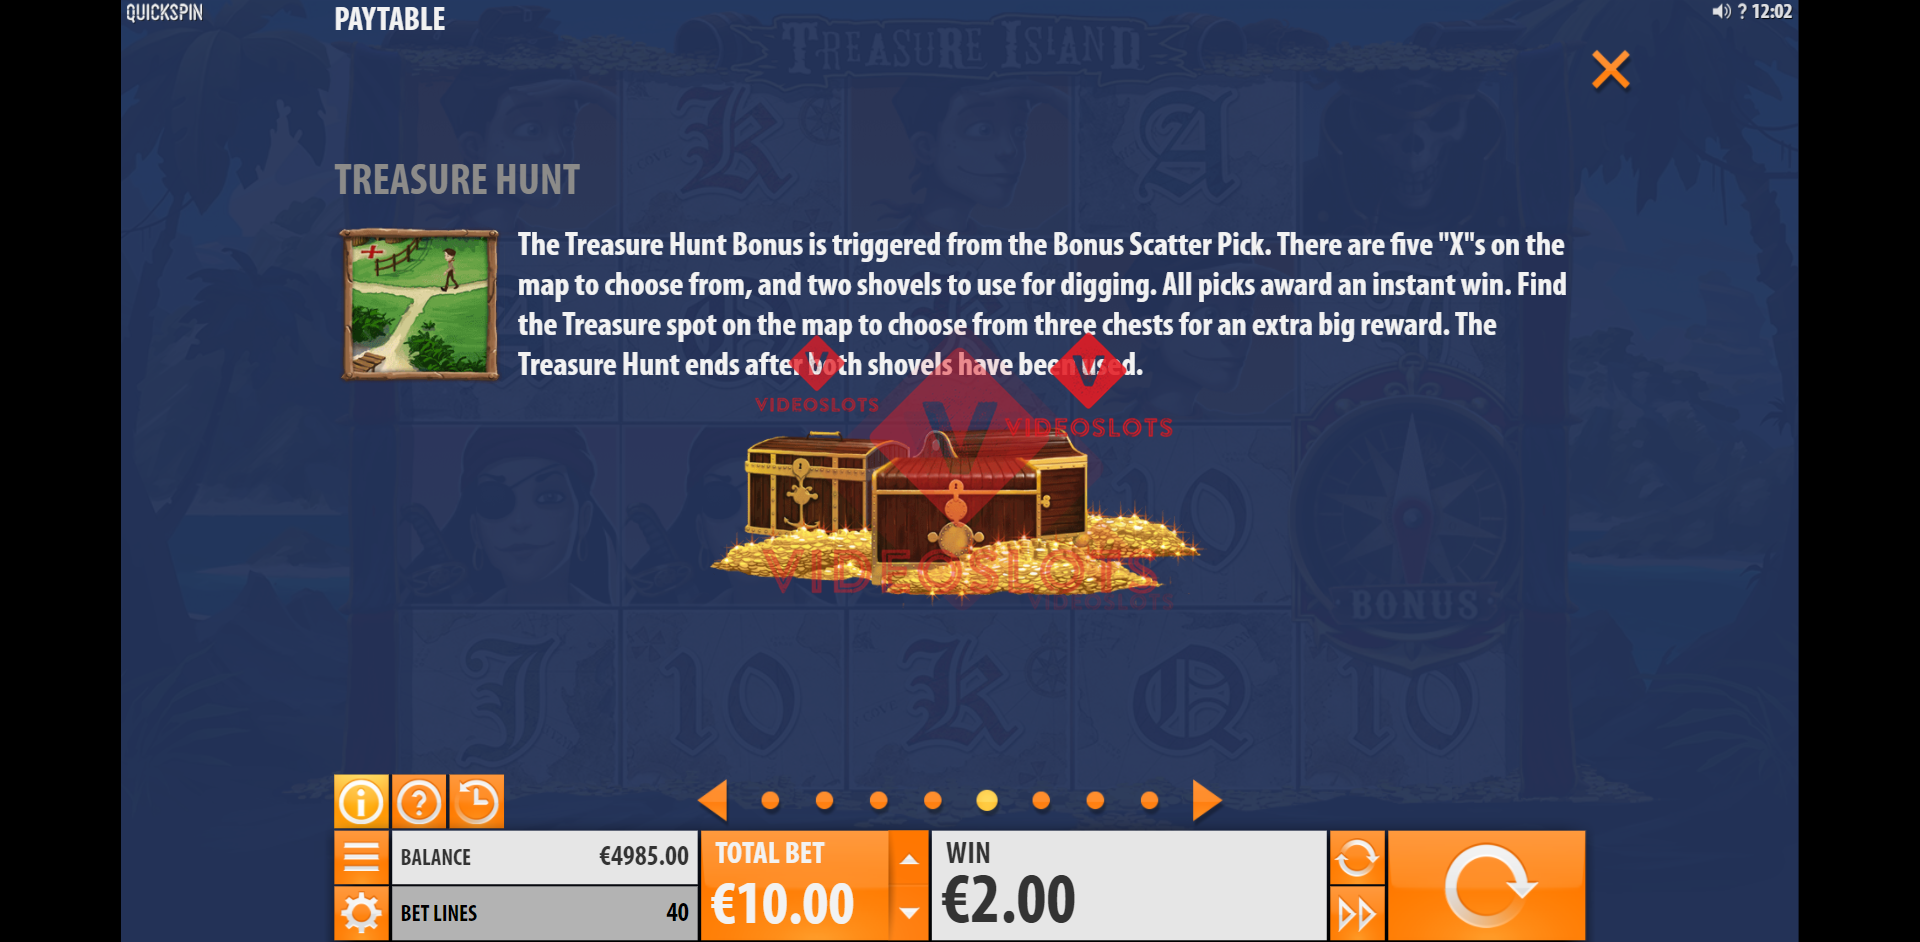 Pay Table and Game Info for Treasure Island slot from Quickspin